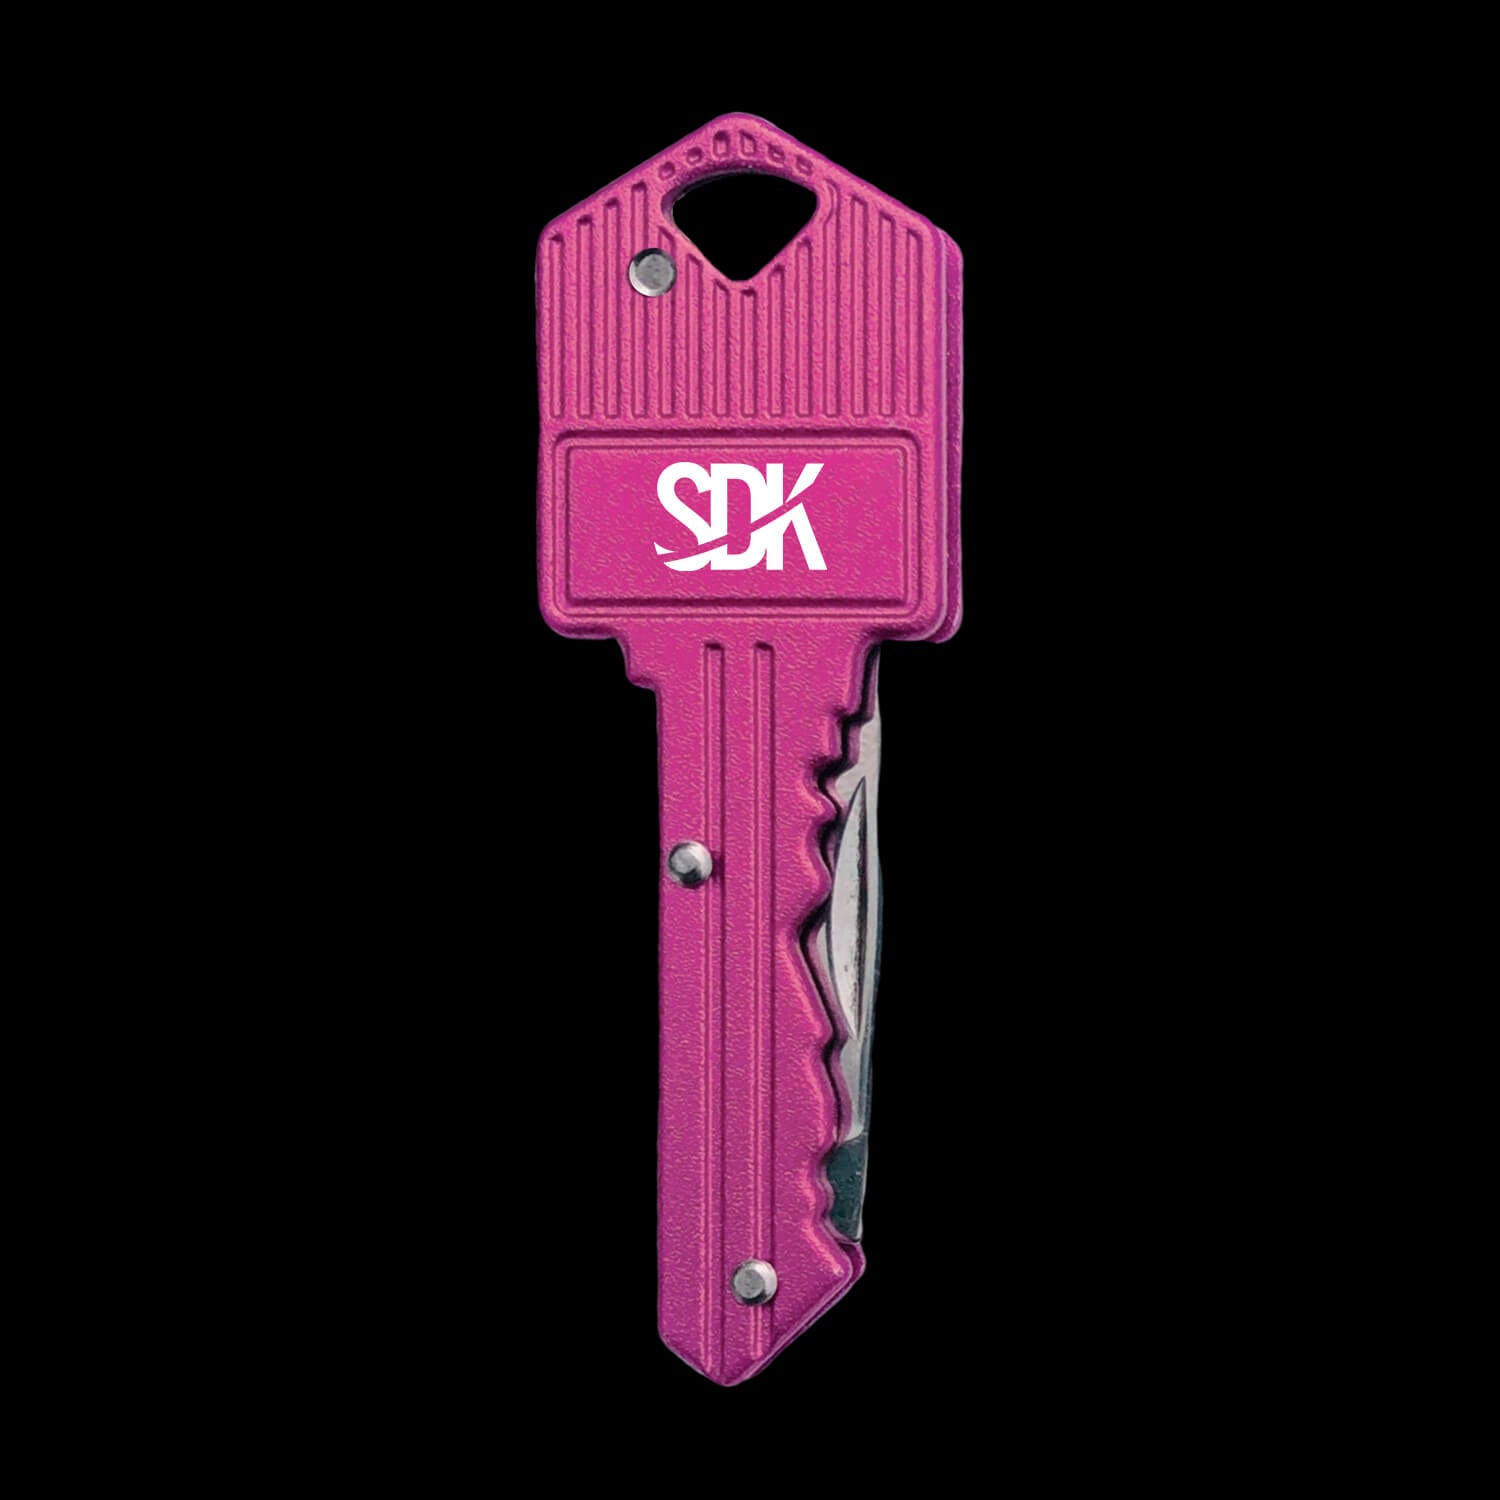 Multipurpose Key Knife for Daily Use and Emergencies